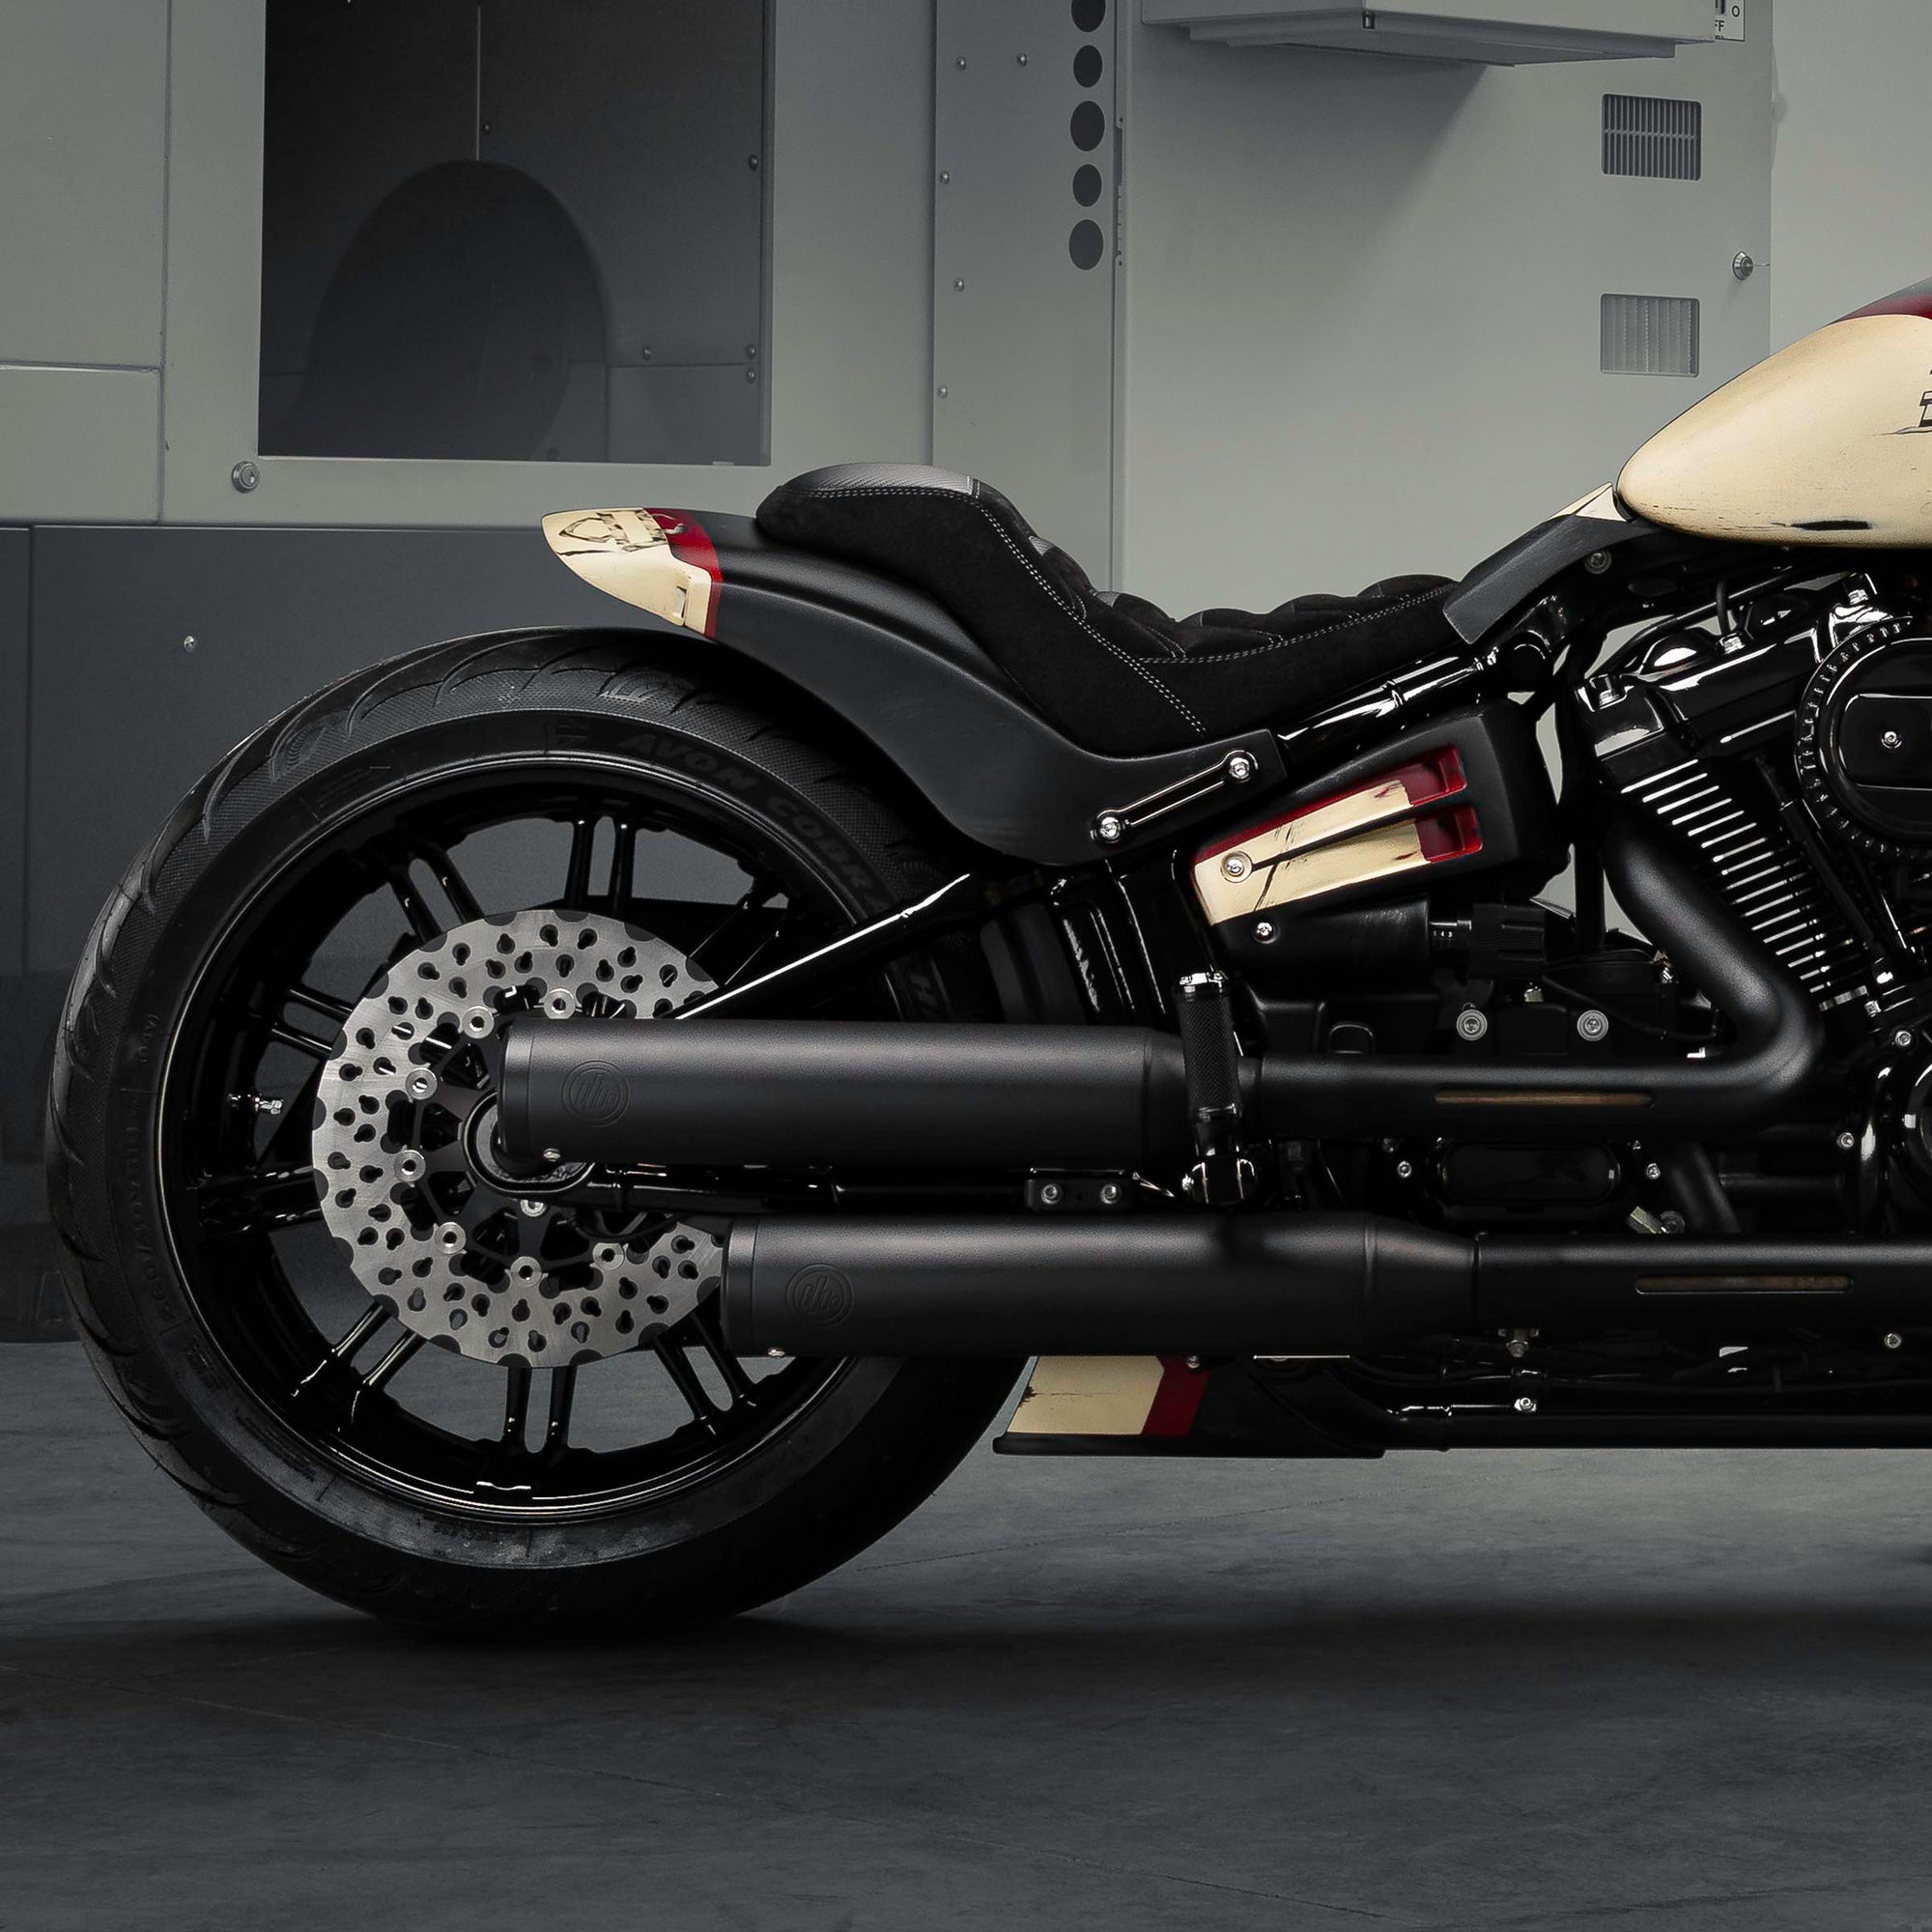 Zoomed Harley Davidson motorcycle with Killer Custom parts from the side in a modern bike shop